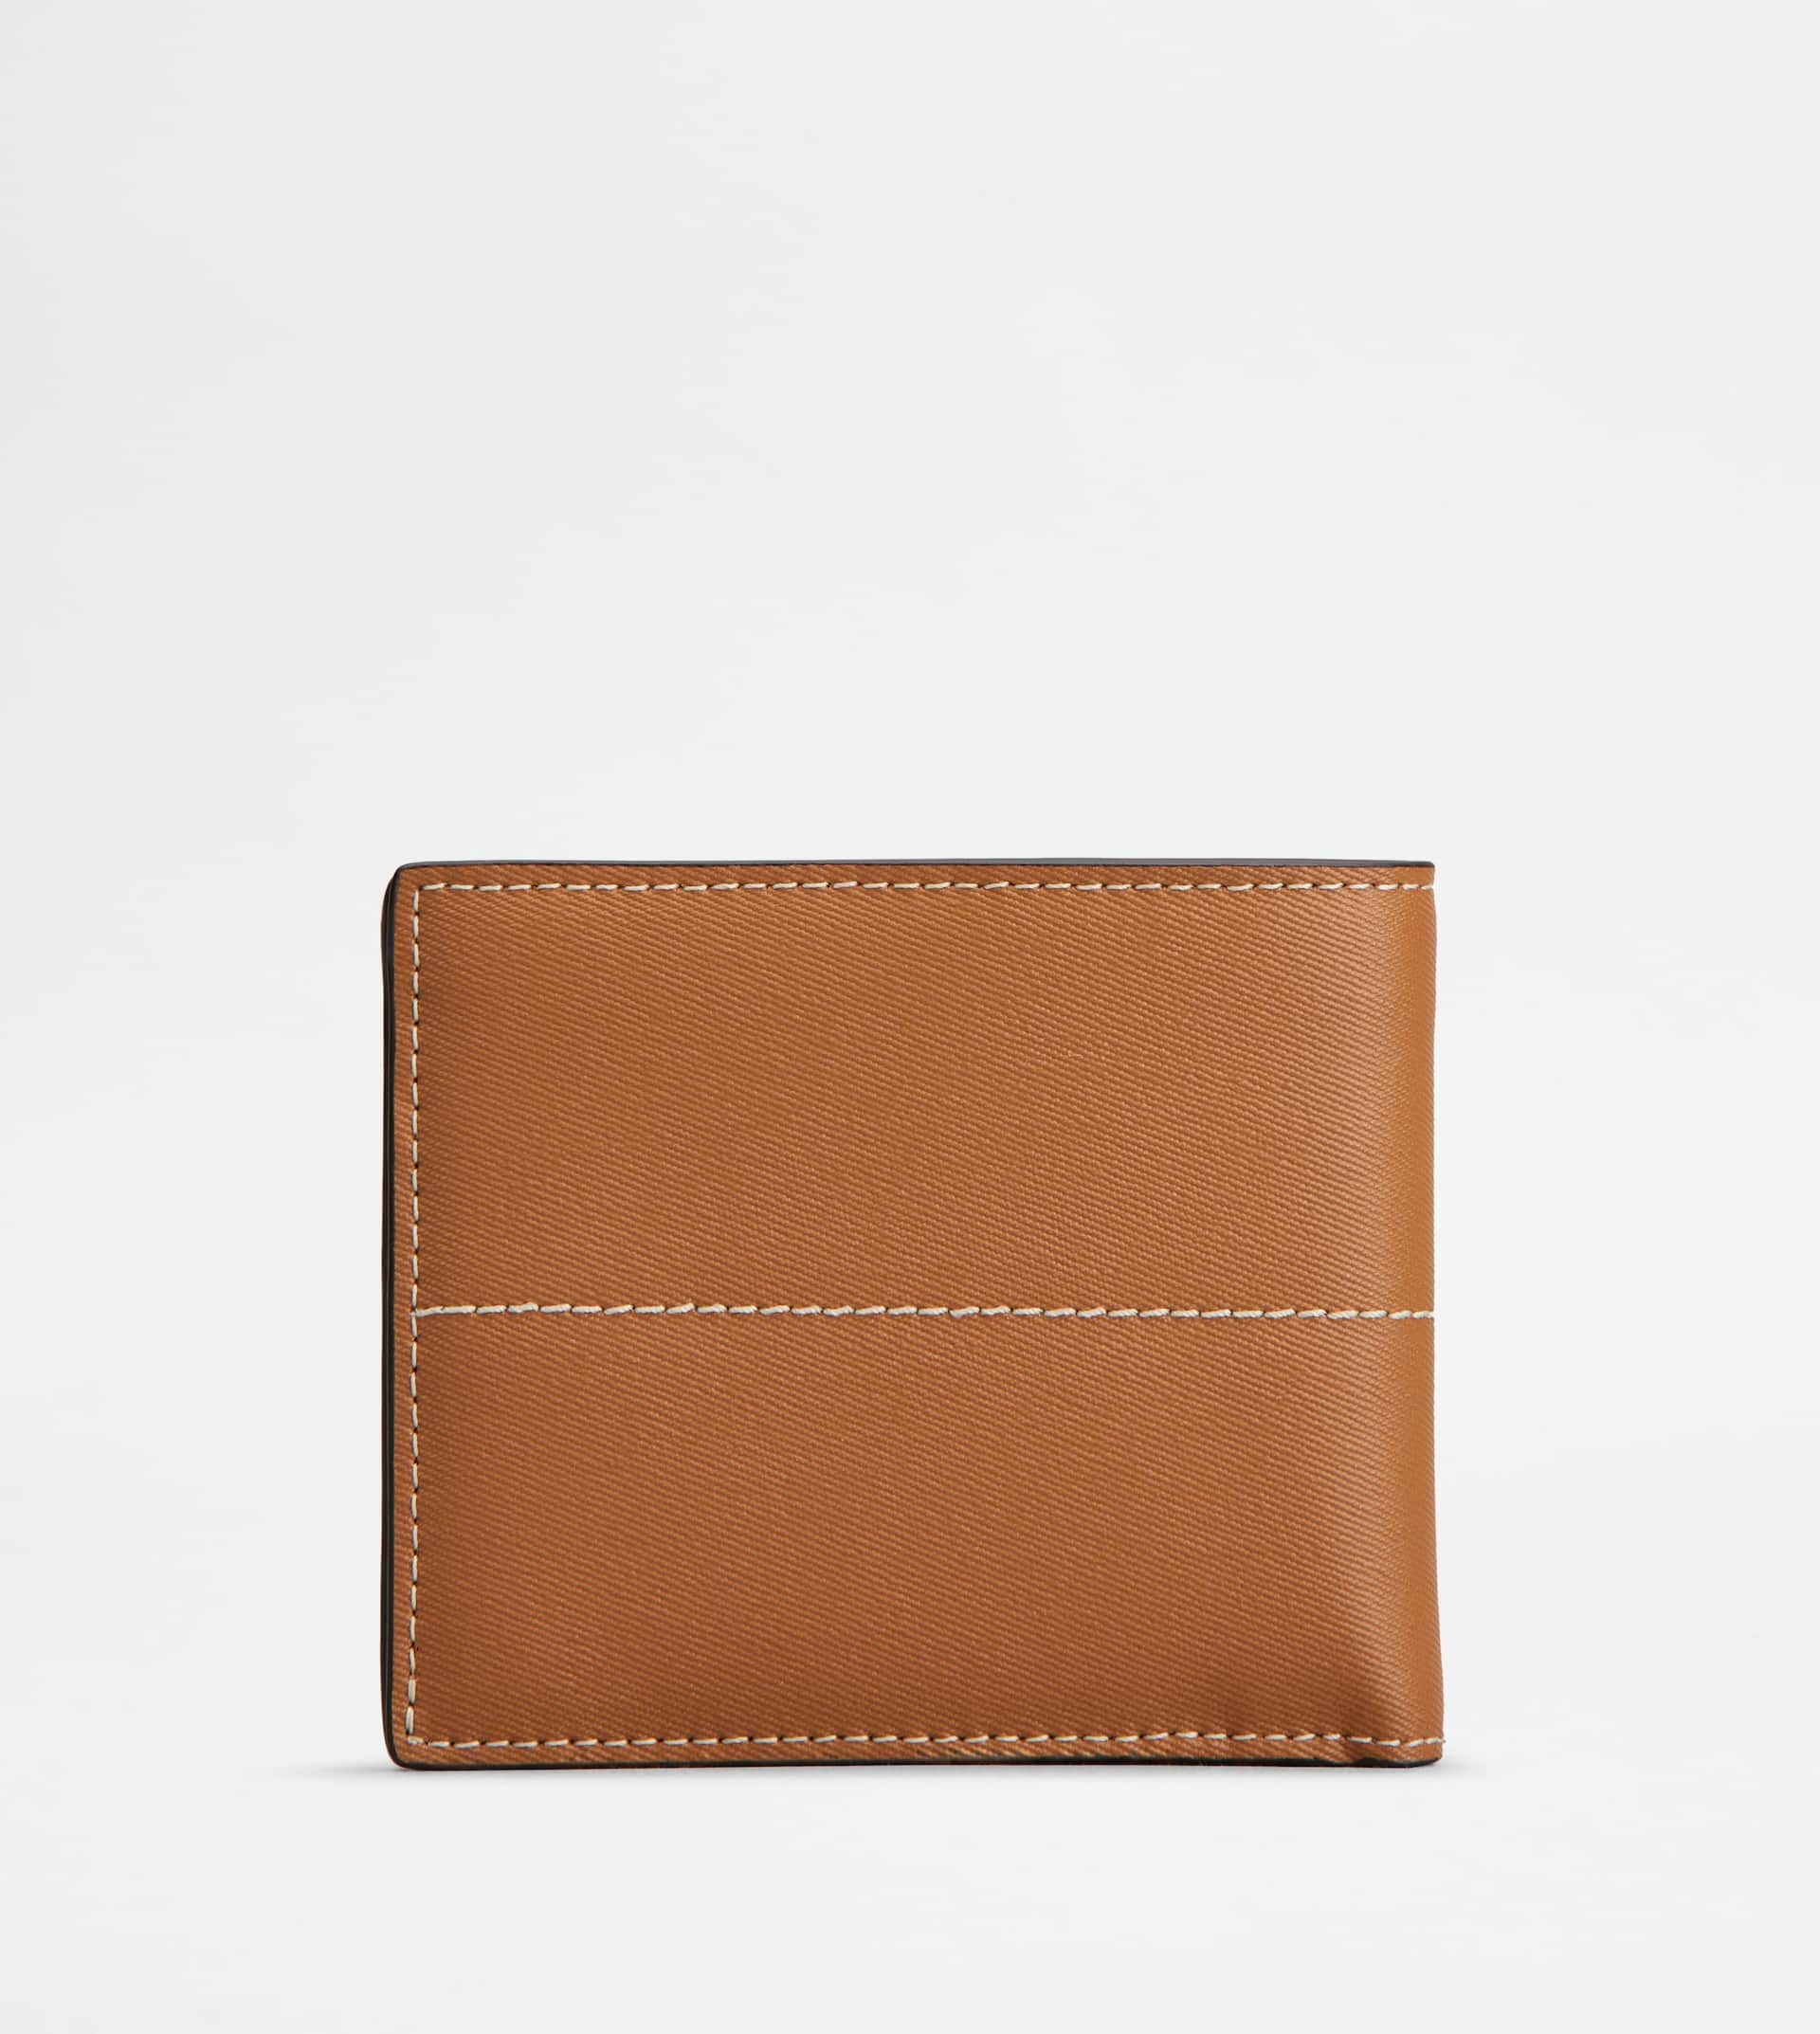 WALLET IN LEATHER - YELLOW, BROWN - 3